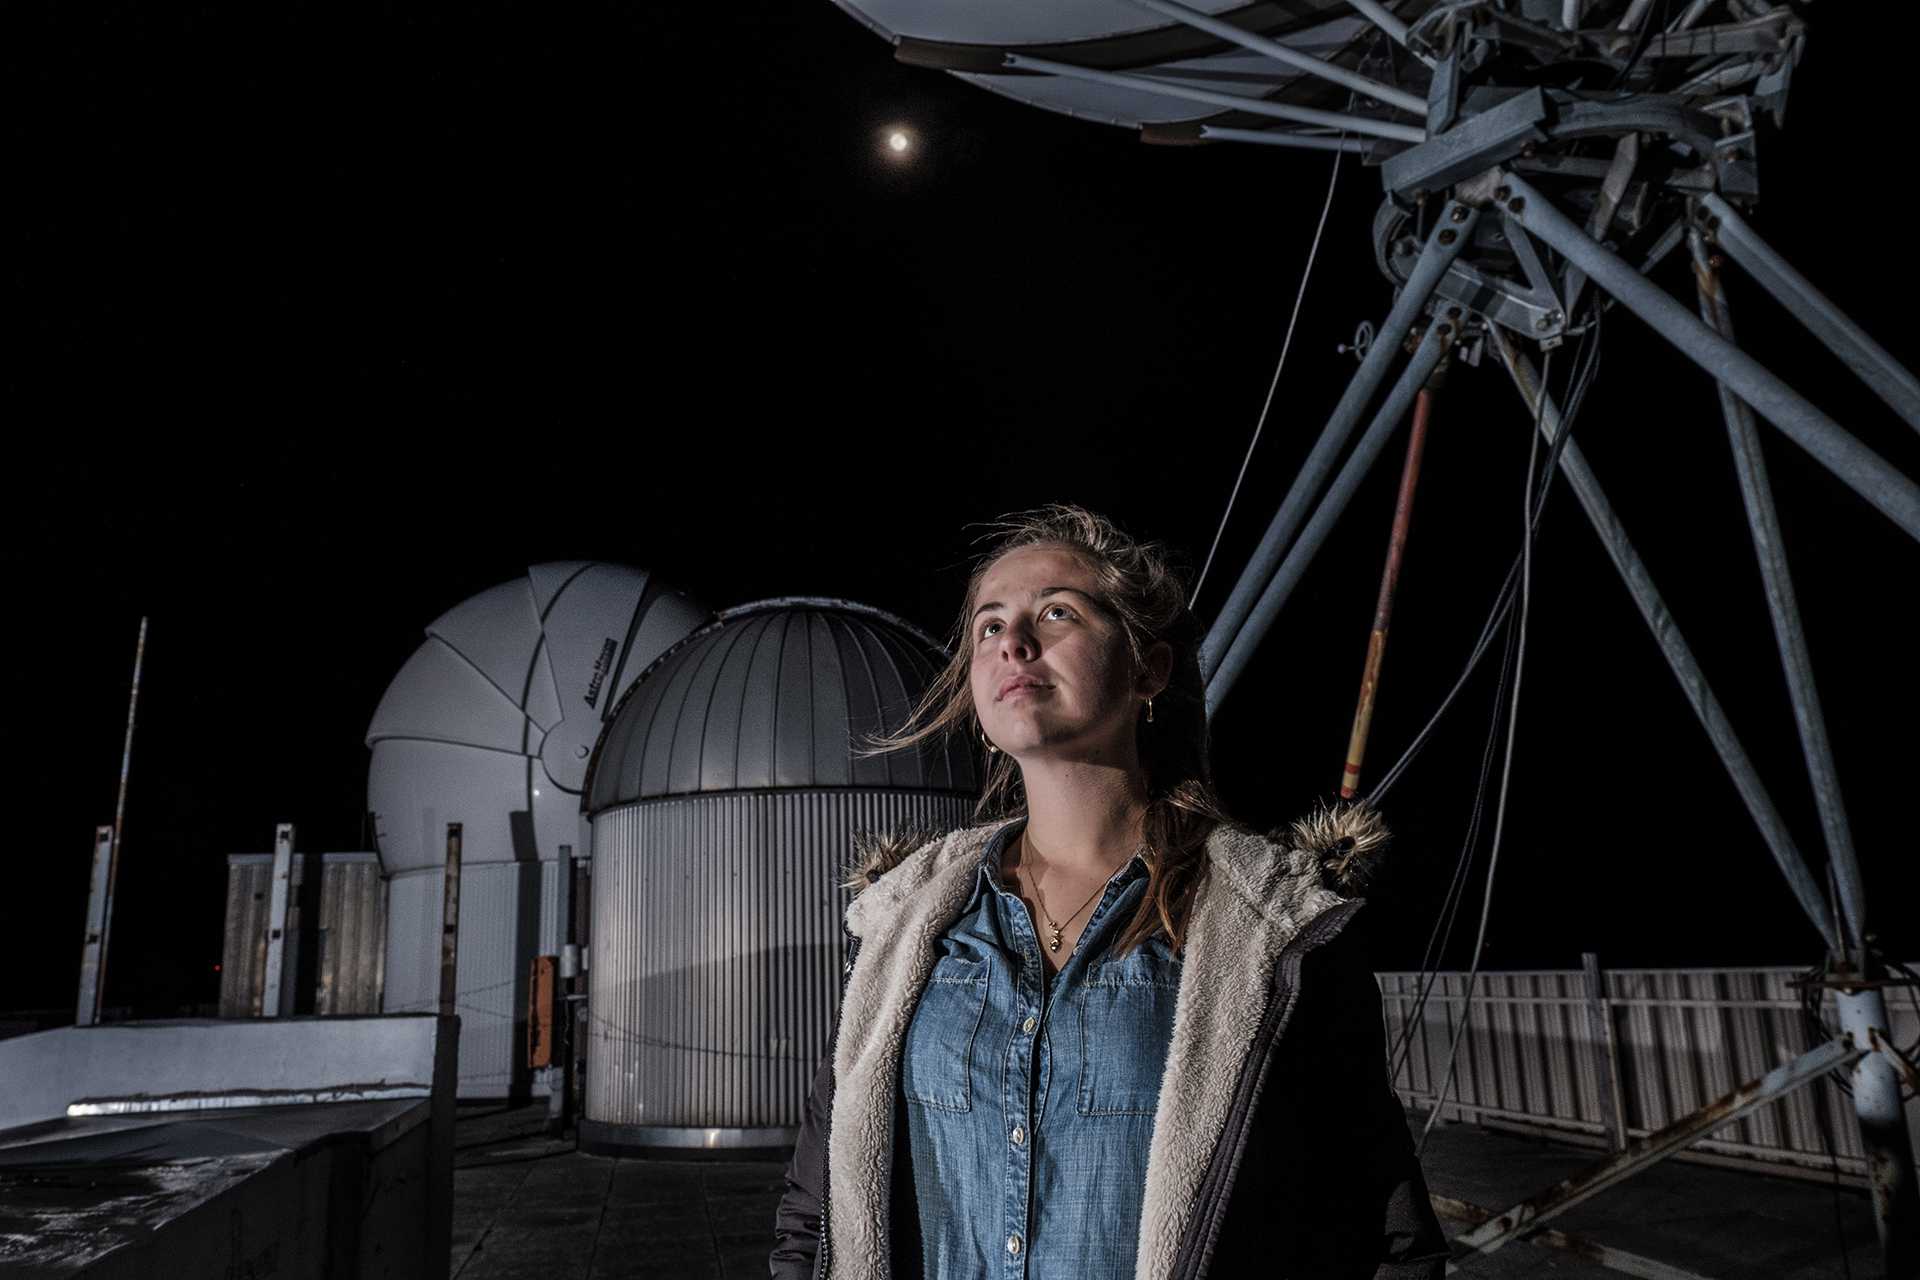 UI sophomore Hannah Gulick poses for a portrait on the in front of the observatory on the roof of Van Allen Hall on Wednesday, Jan. 31, 2018. Gulick helped to design a satellite which will be launched into space this spring. (Nick Rohlman)